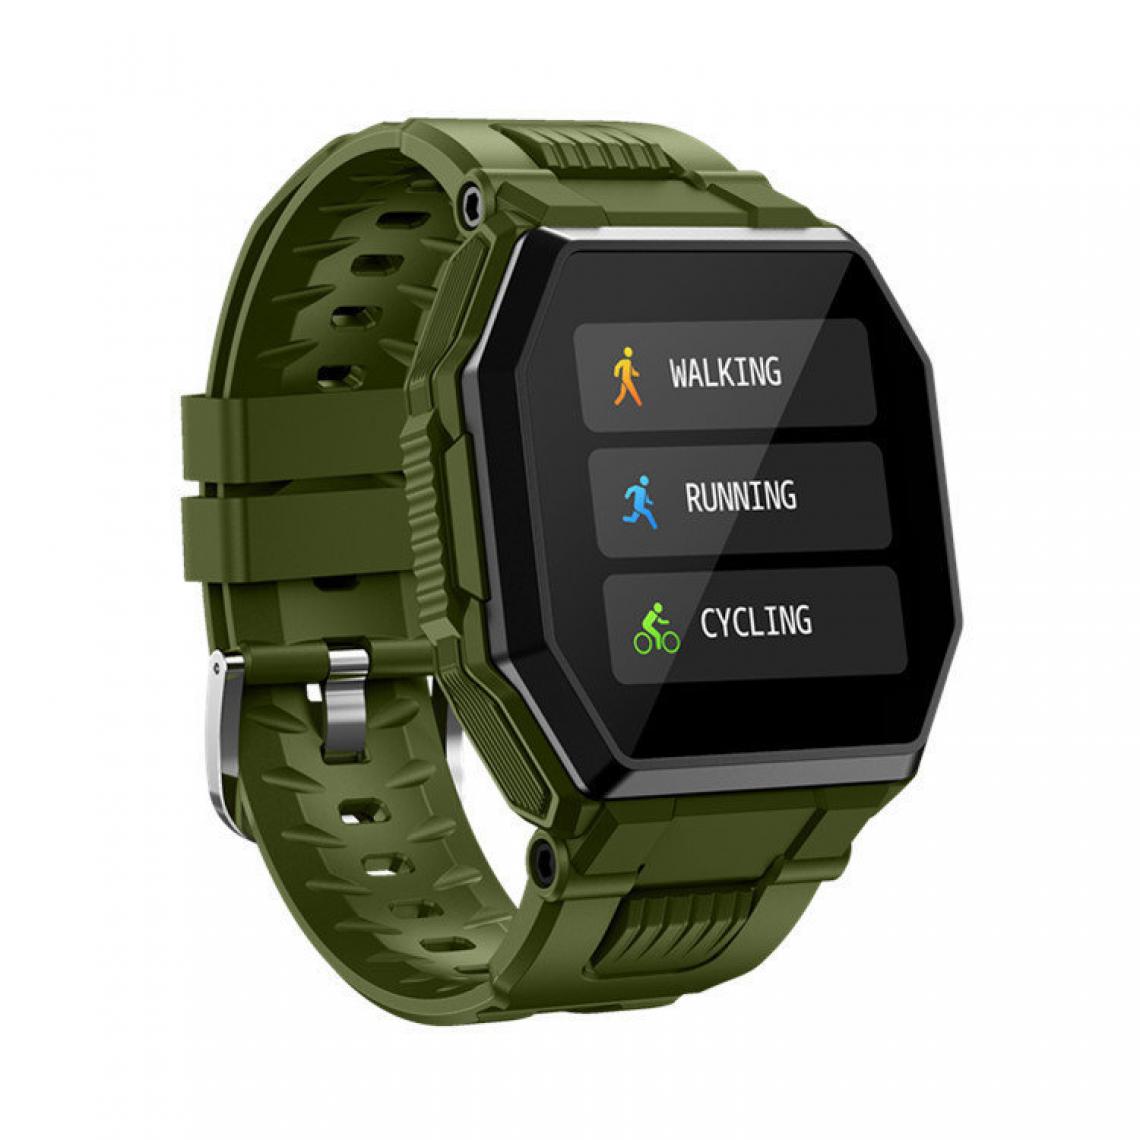 Chronotech Montres - Smart Watch S9 Smart watch with Bluetooth call, full touch, blood pressure and heart rate monitoring, sports fitness tracker(Green) - Montre connectée